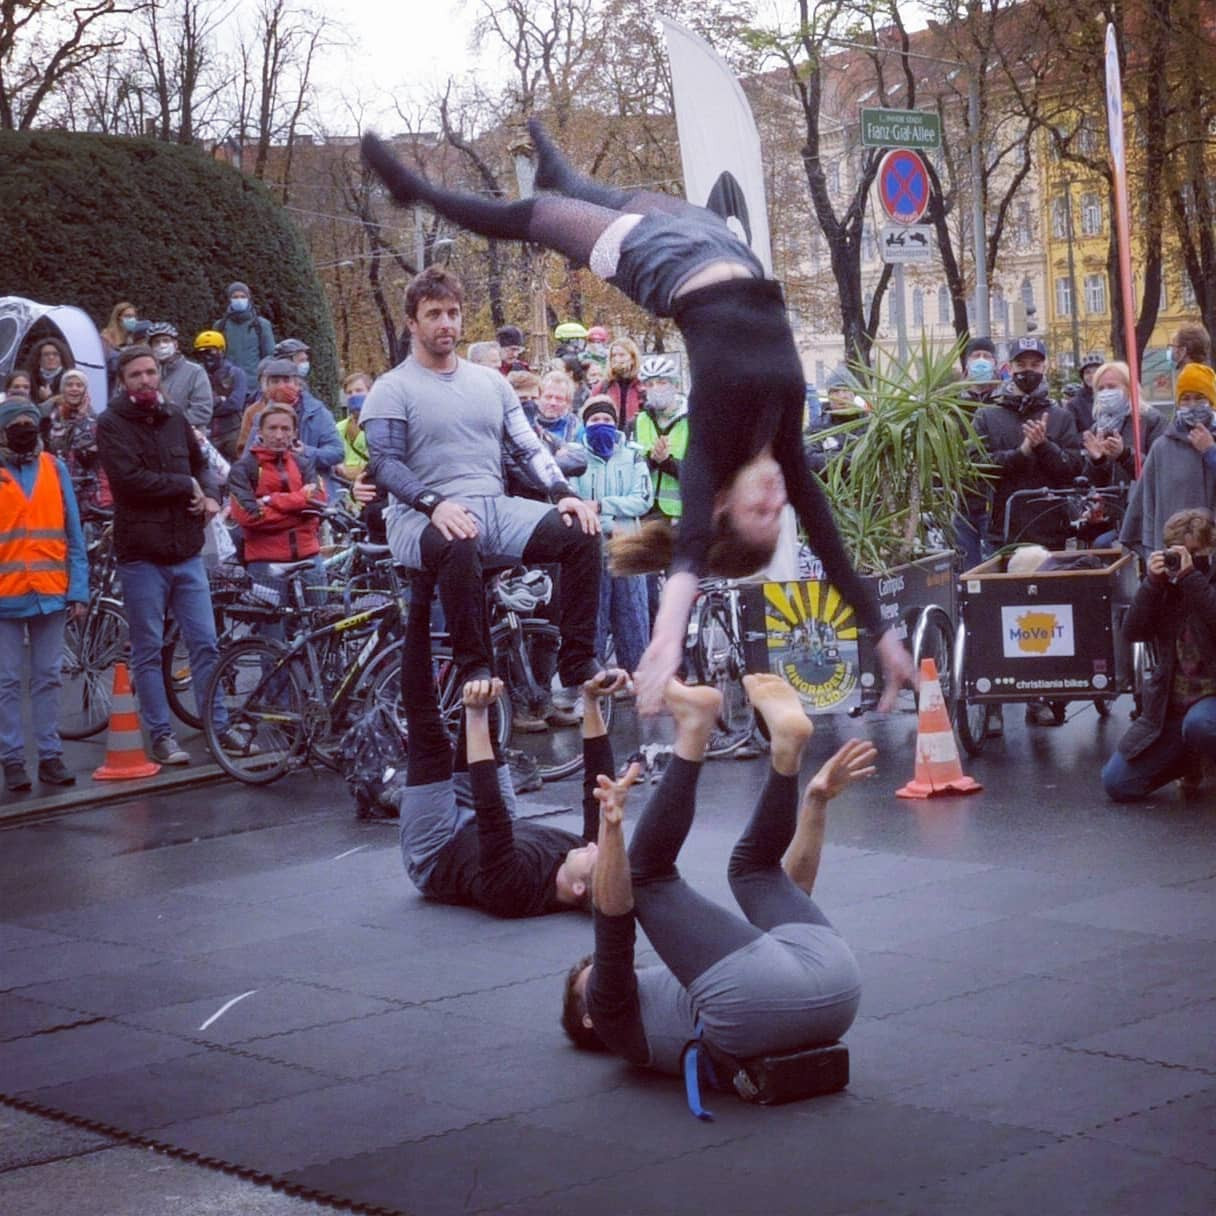 Uwe and Jasmina Acro Dance at the Urban Acro Festival in Zürich